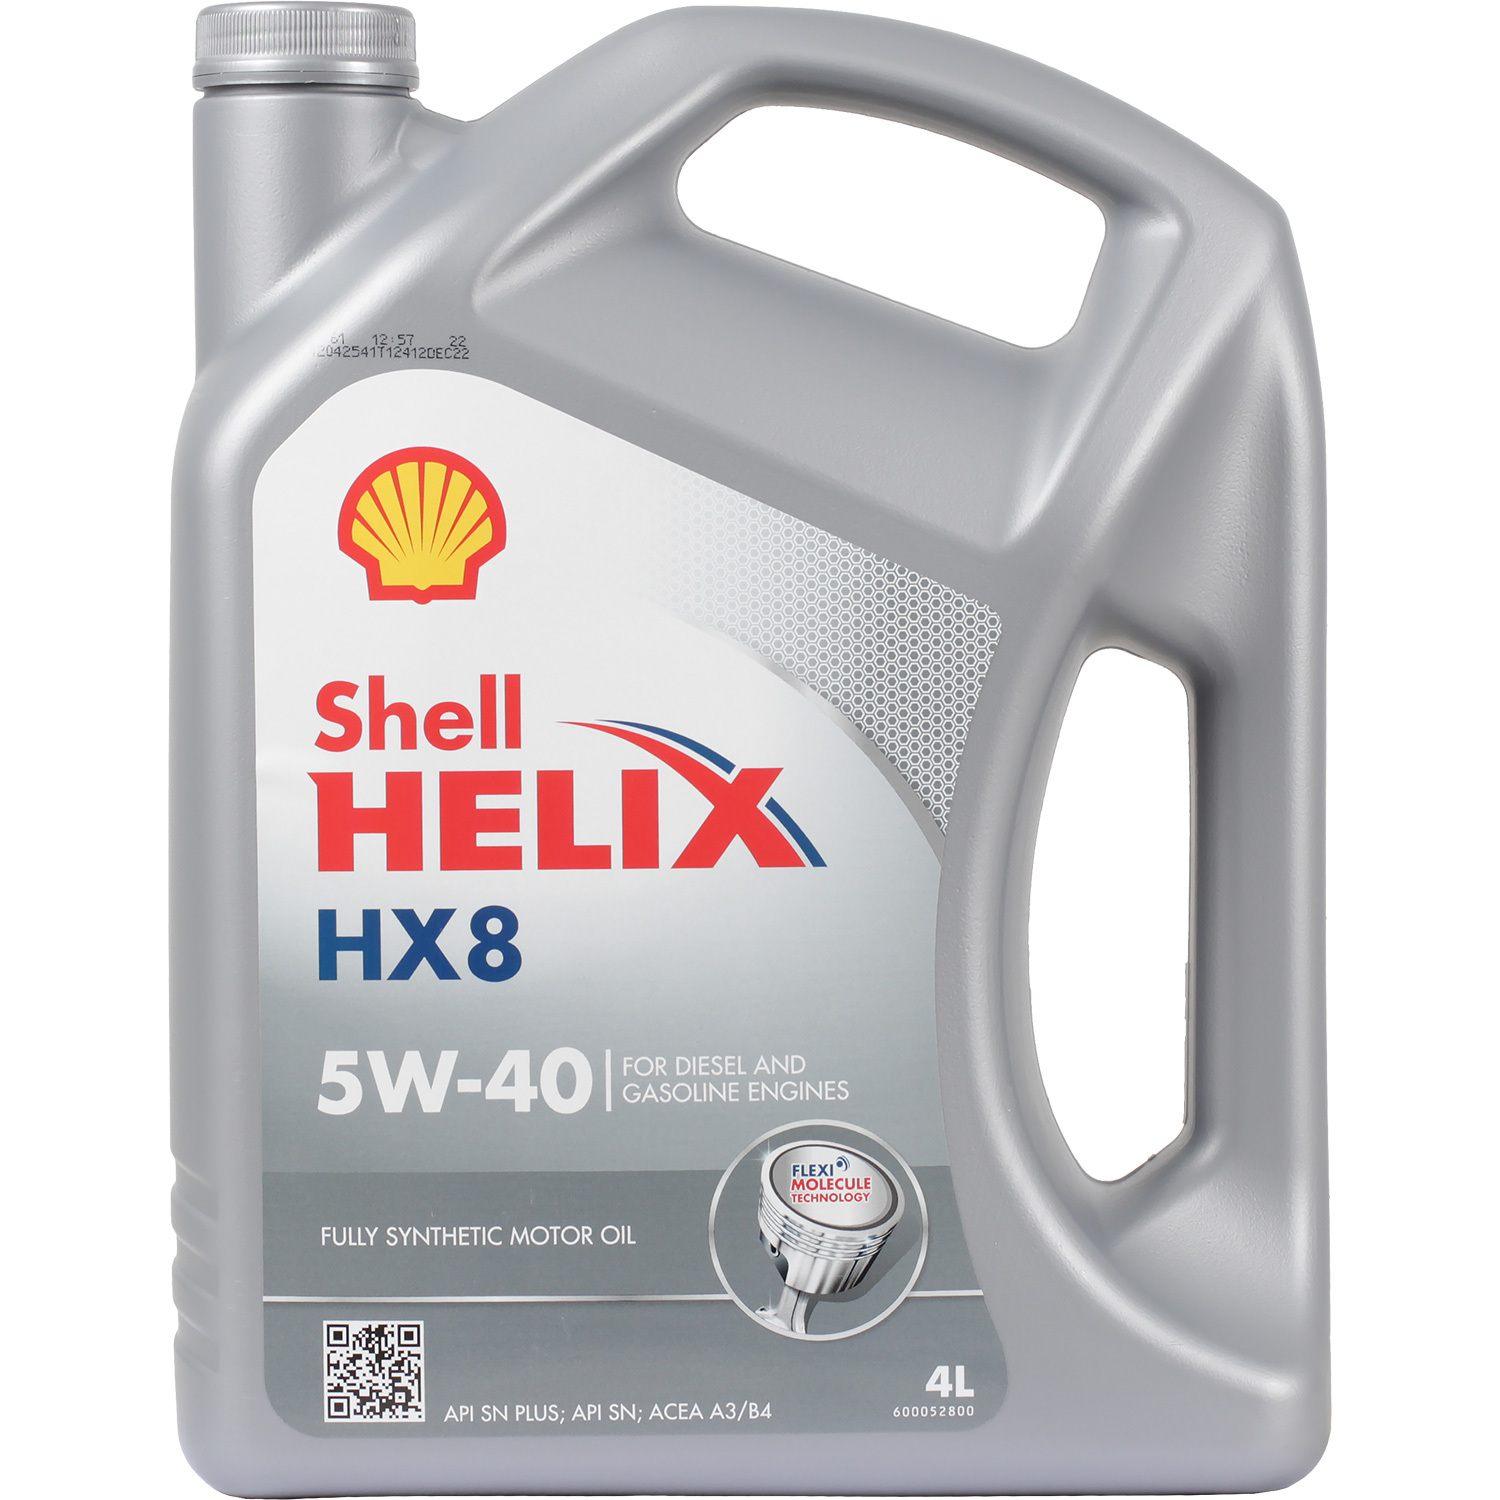 Shell Моторное масло Shell Helix HX8 5W-40, 4 л